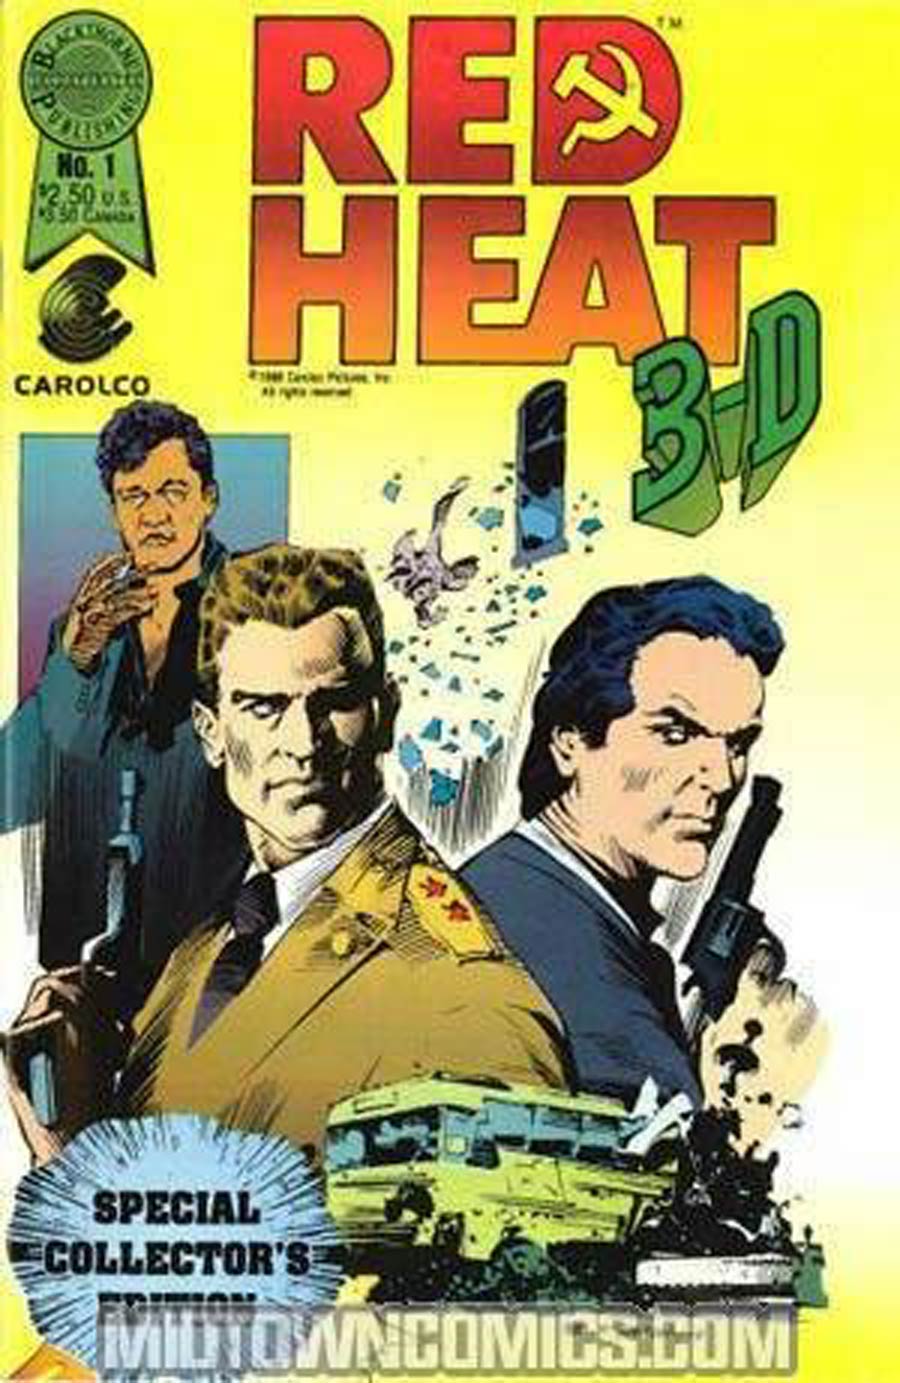 Blackthorne 3-D Series #45 Red Heat Movie Adaptation In 3-D #1 Without Glasses